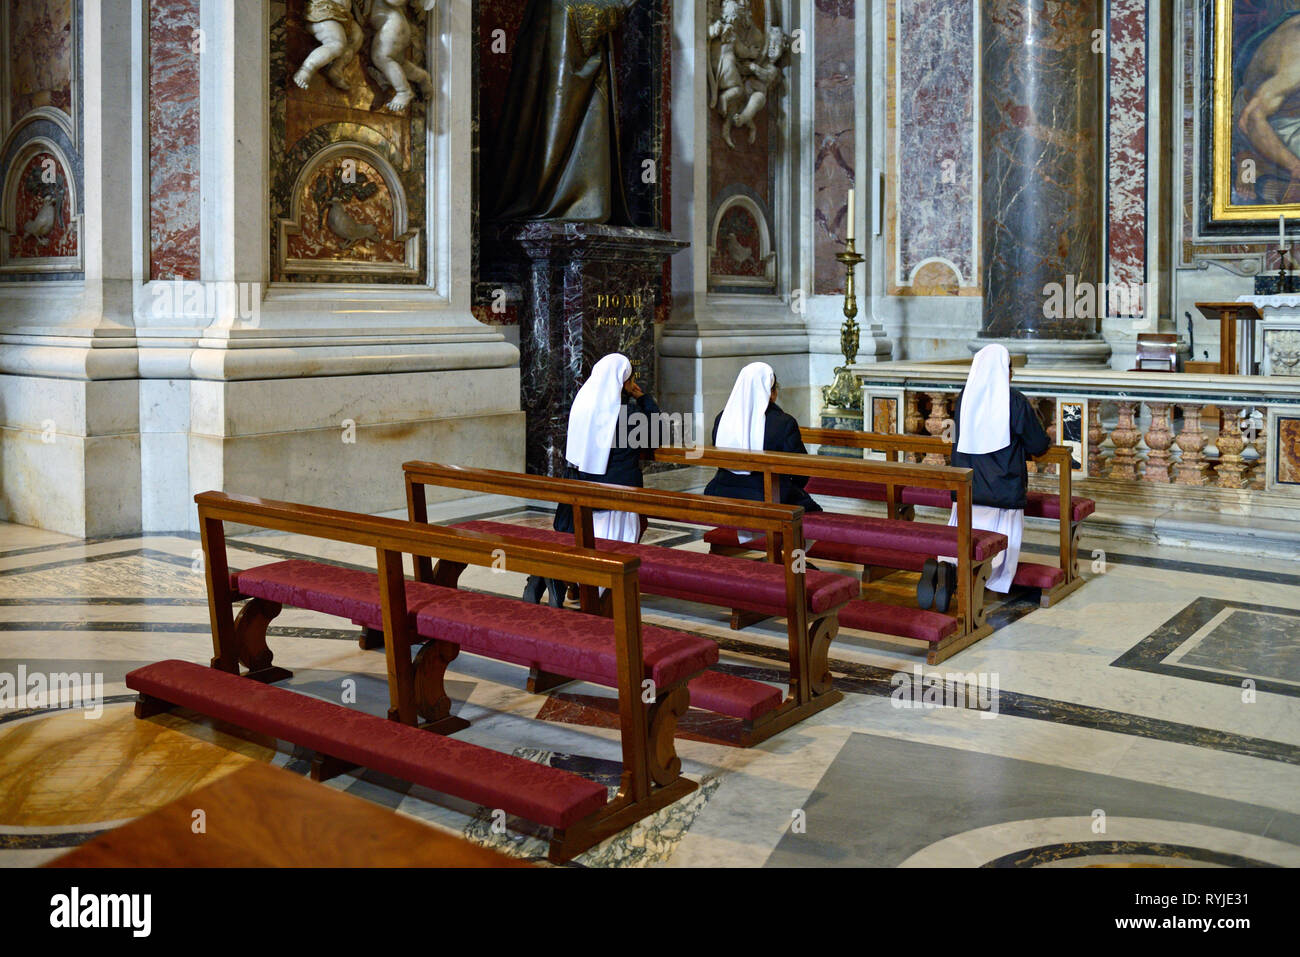 Three Nuns Praying in Saint Peter's Basilica, Church or Cathedral, Vatican, Rome, Italy Stock Photo